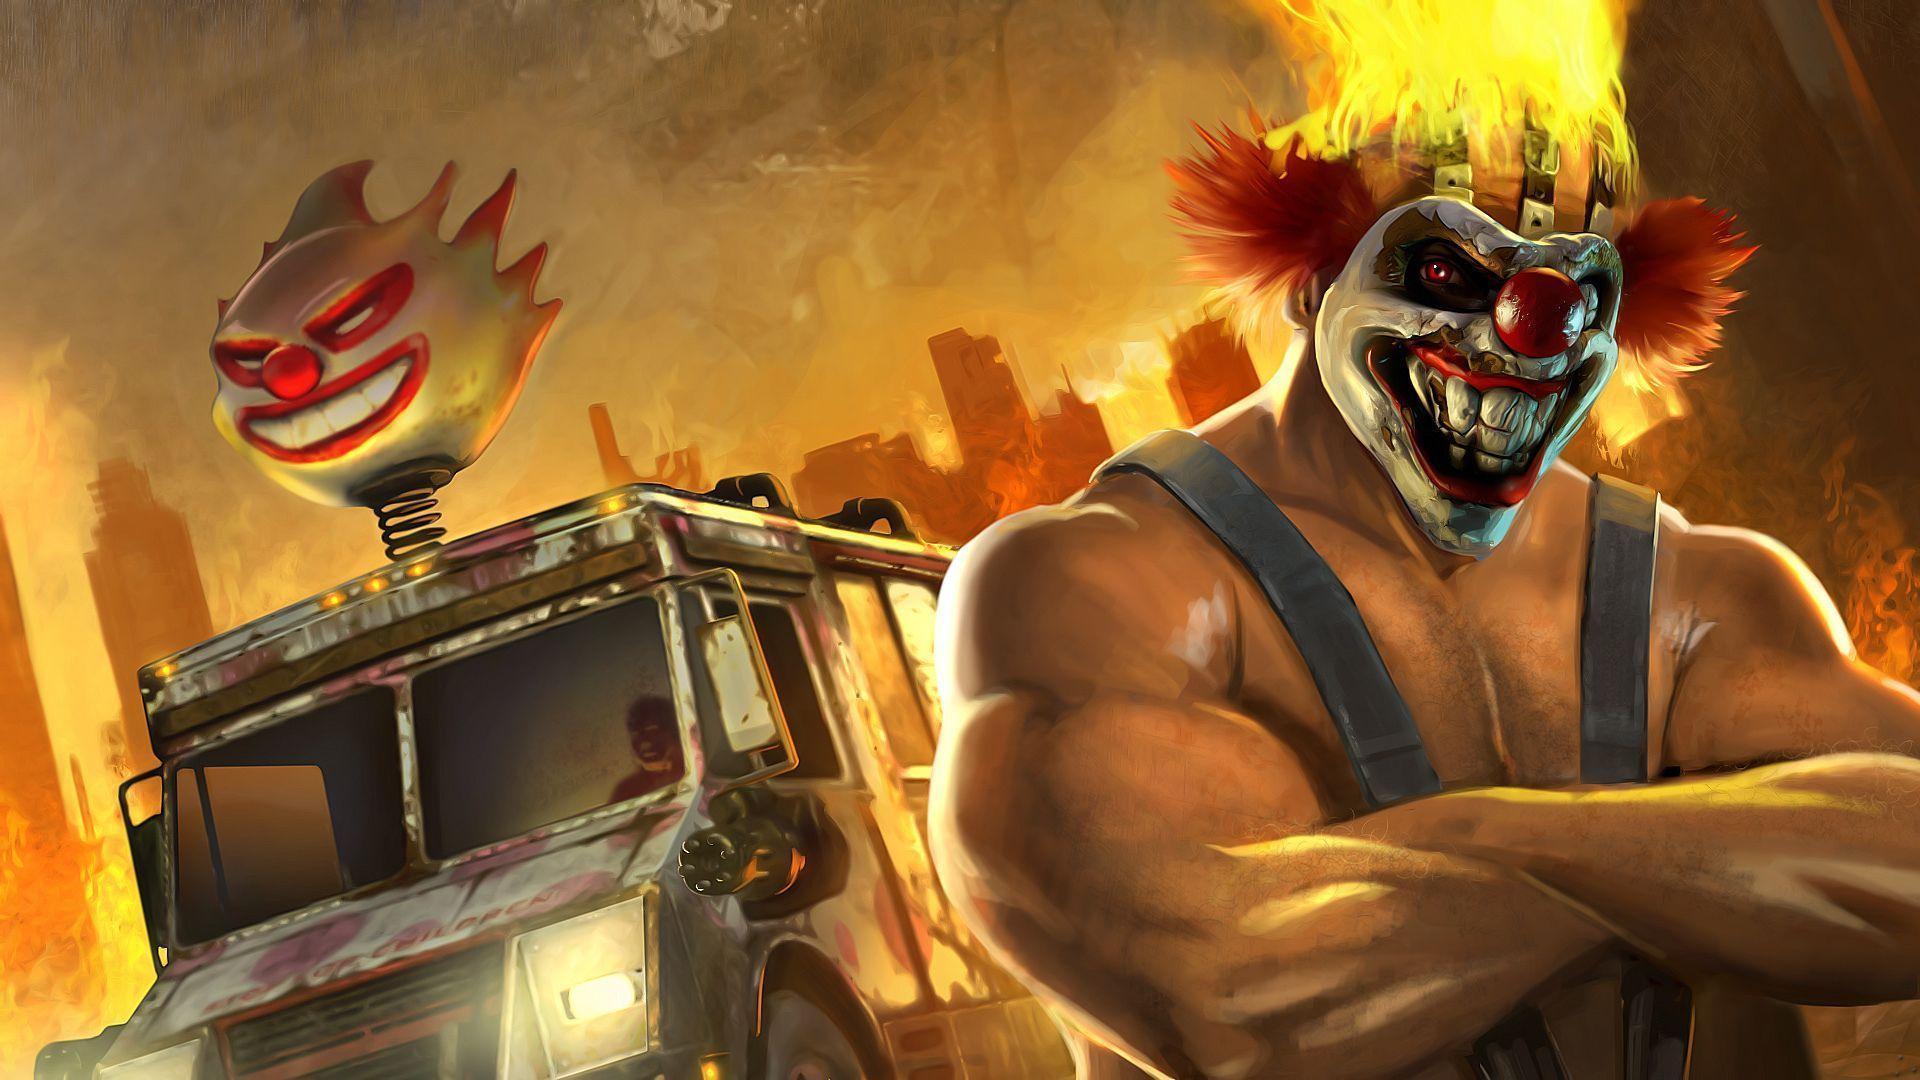 Twisted Metal Wallpaper. Twisted Metal Background